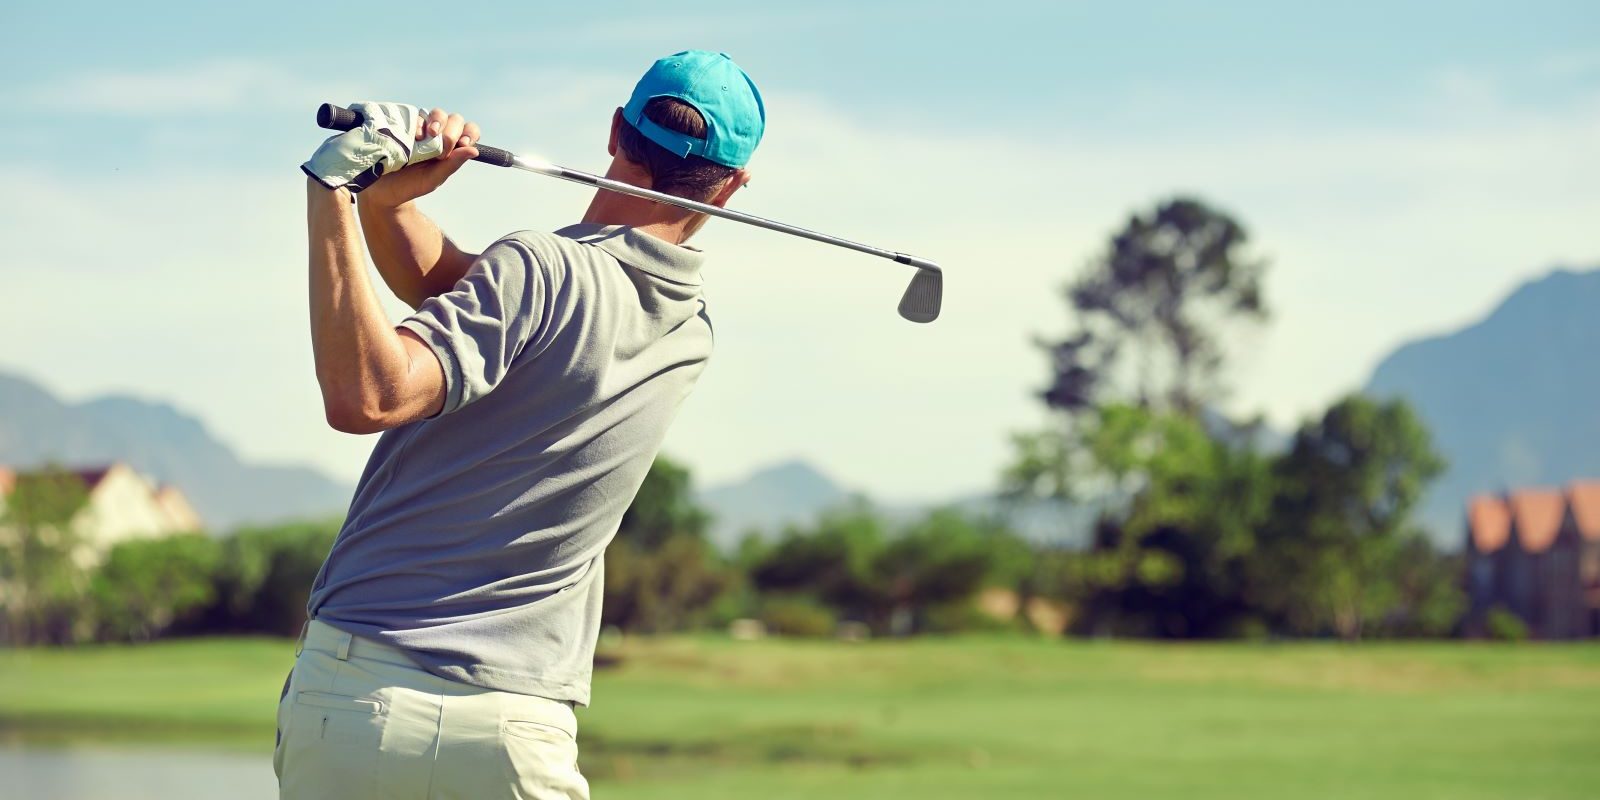 Golf is a low-impact sport, but like any activity, it has the potential for injuries - and even shoulder injuries aren't uncommon from golf.